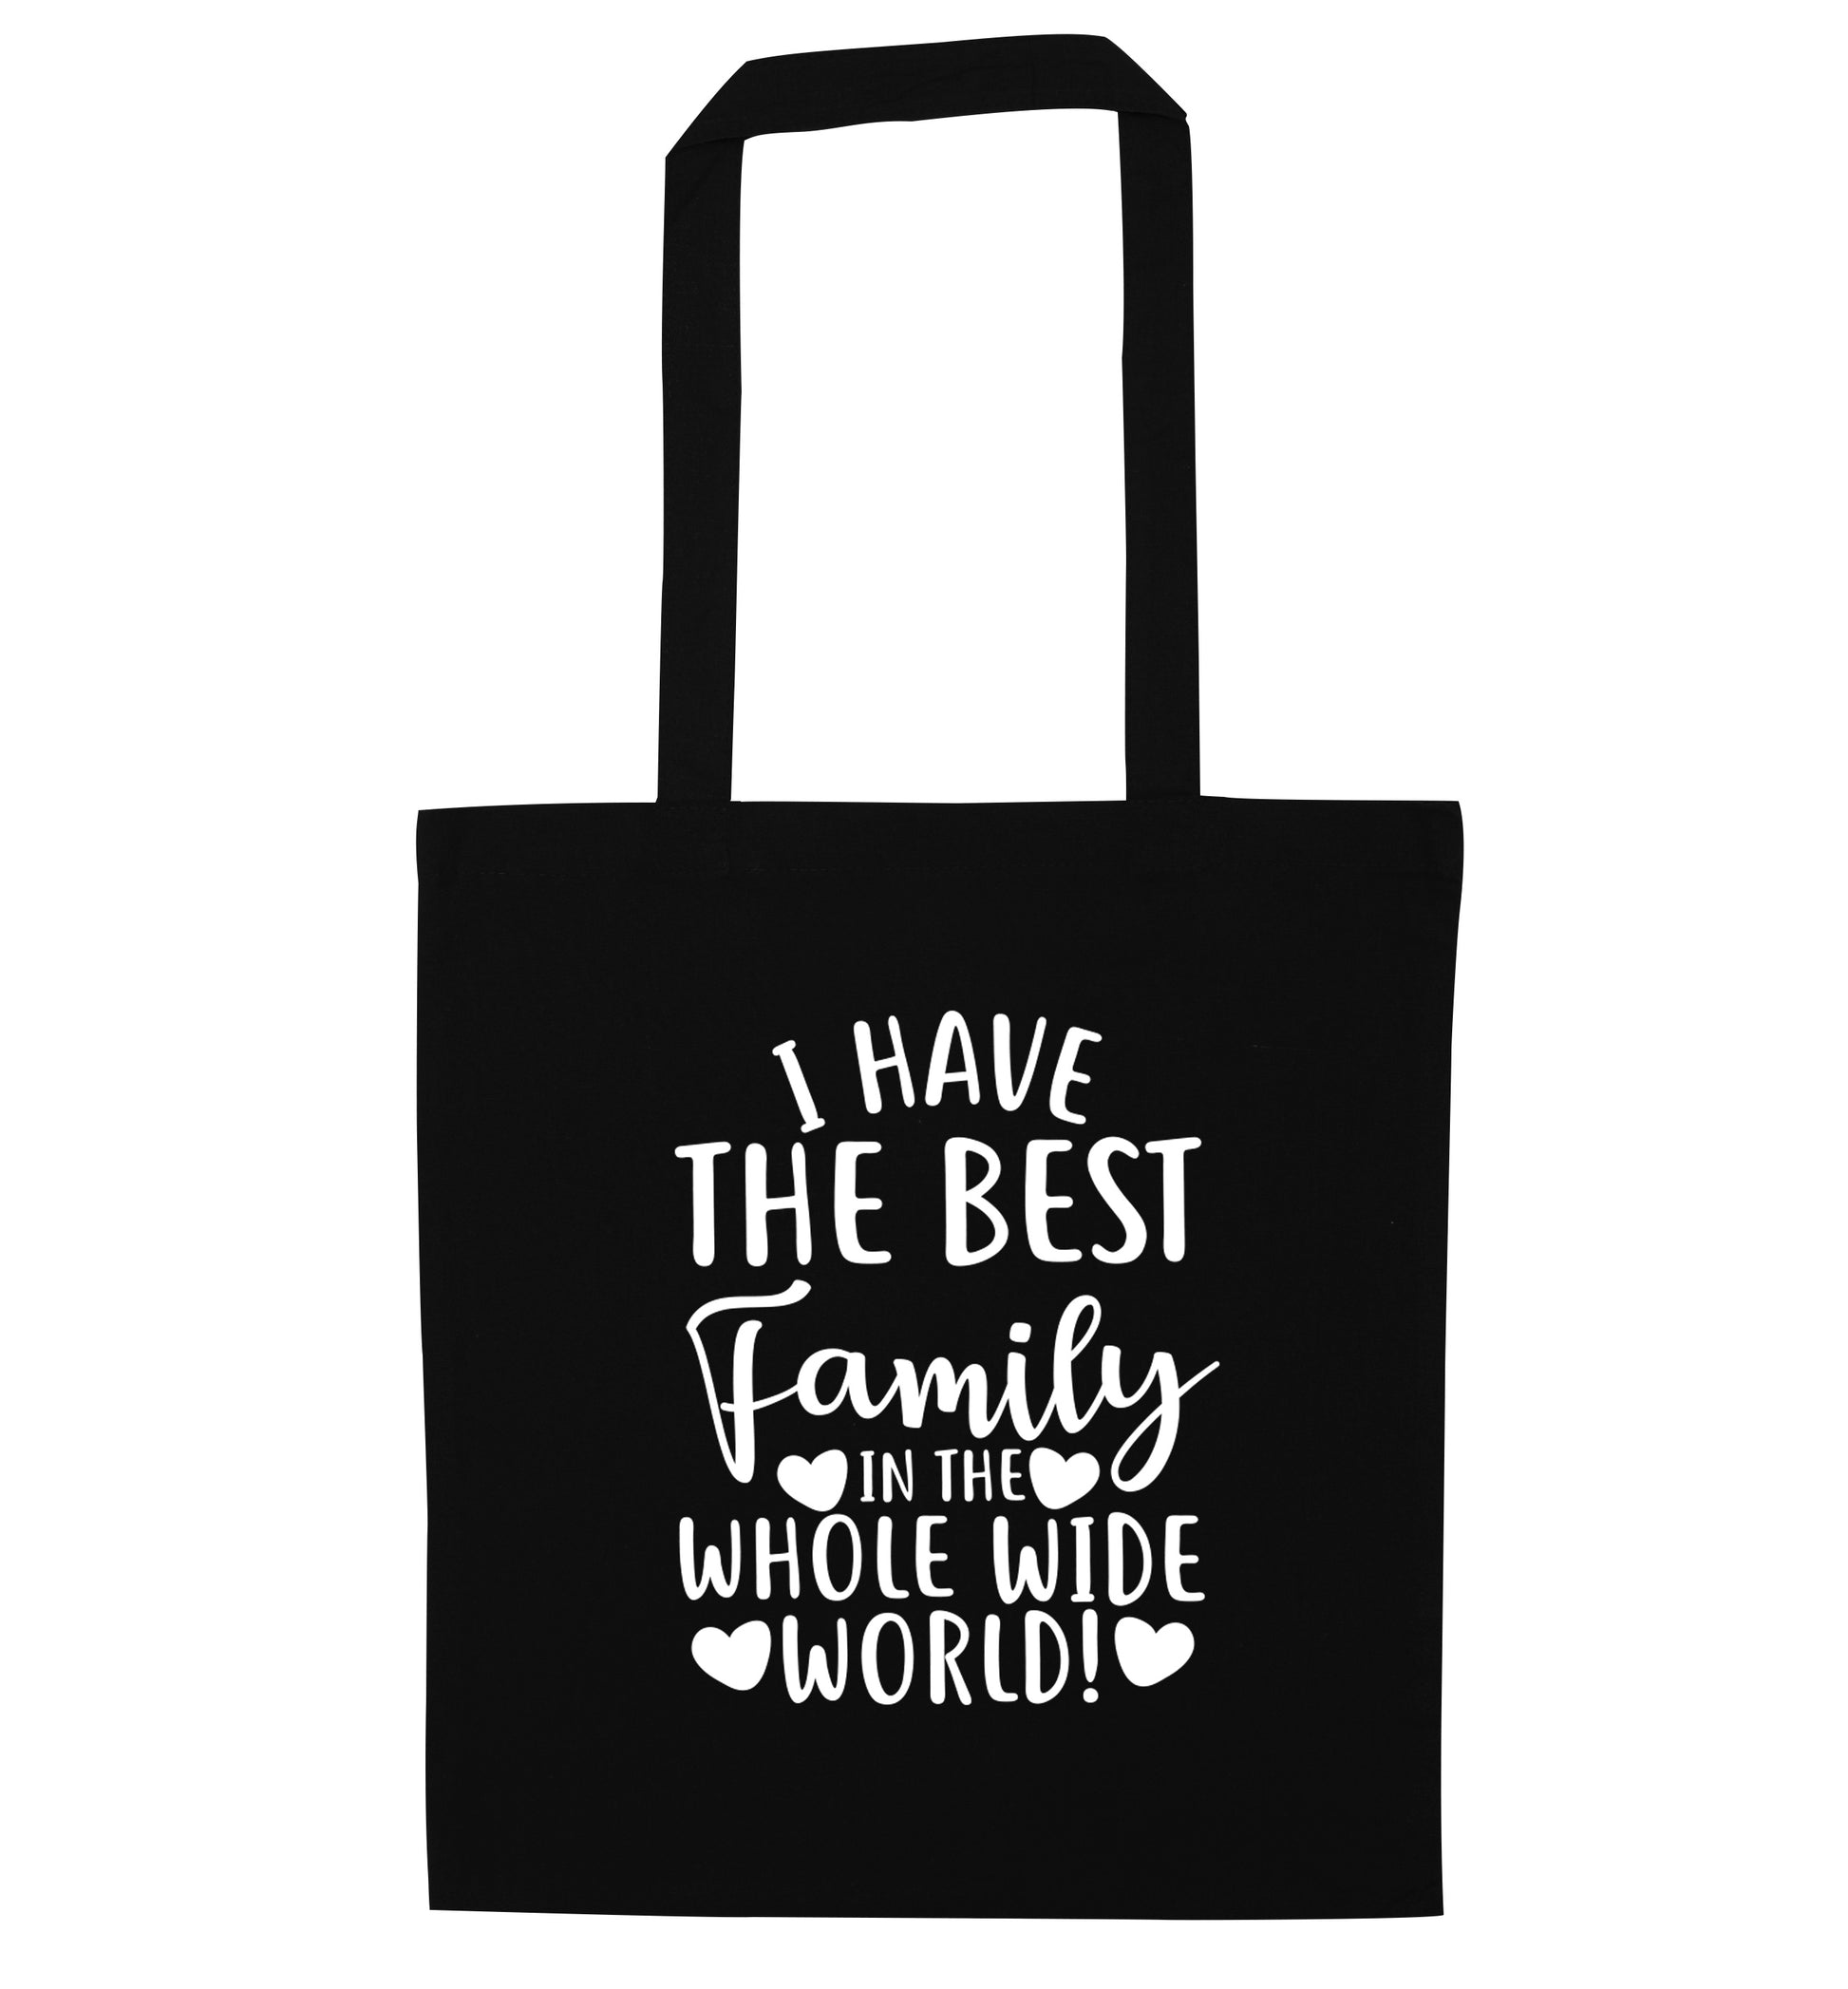 I have the best family in the whole wide world! black tote bag